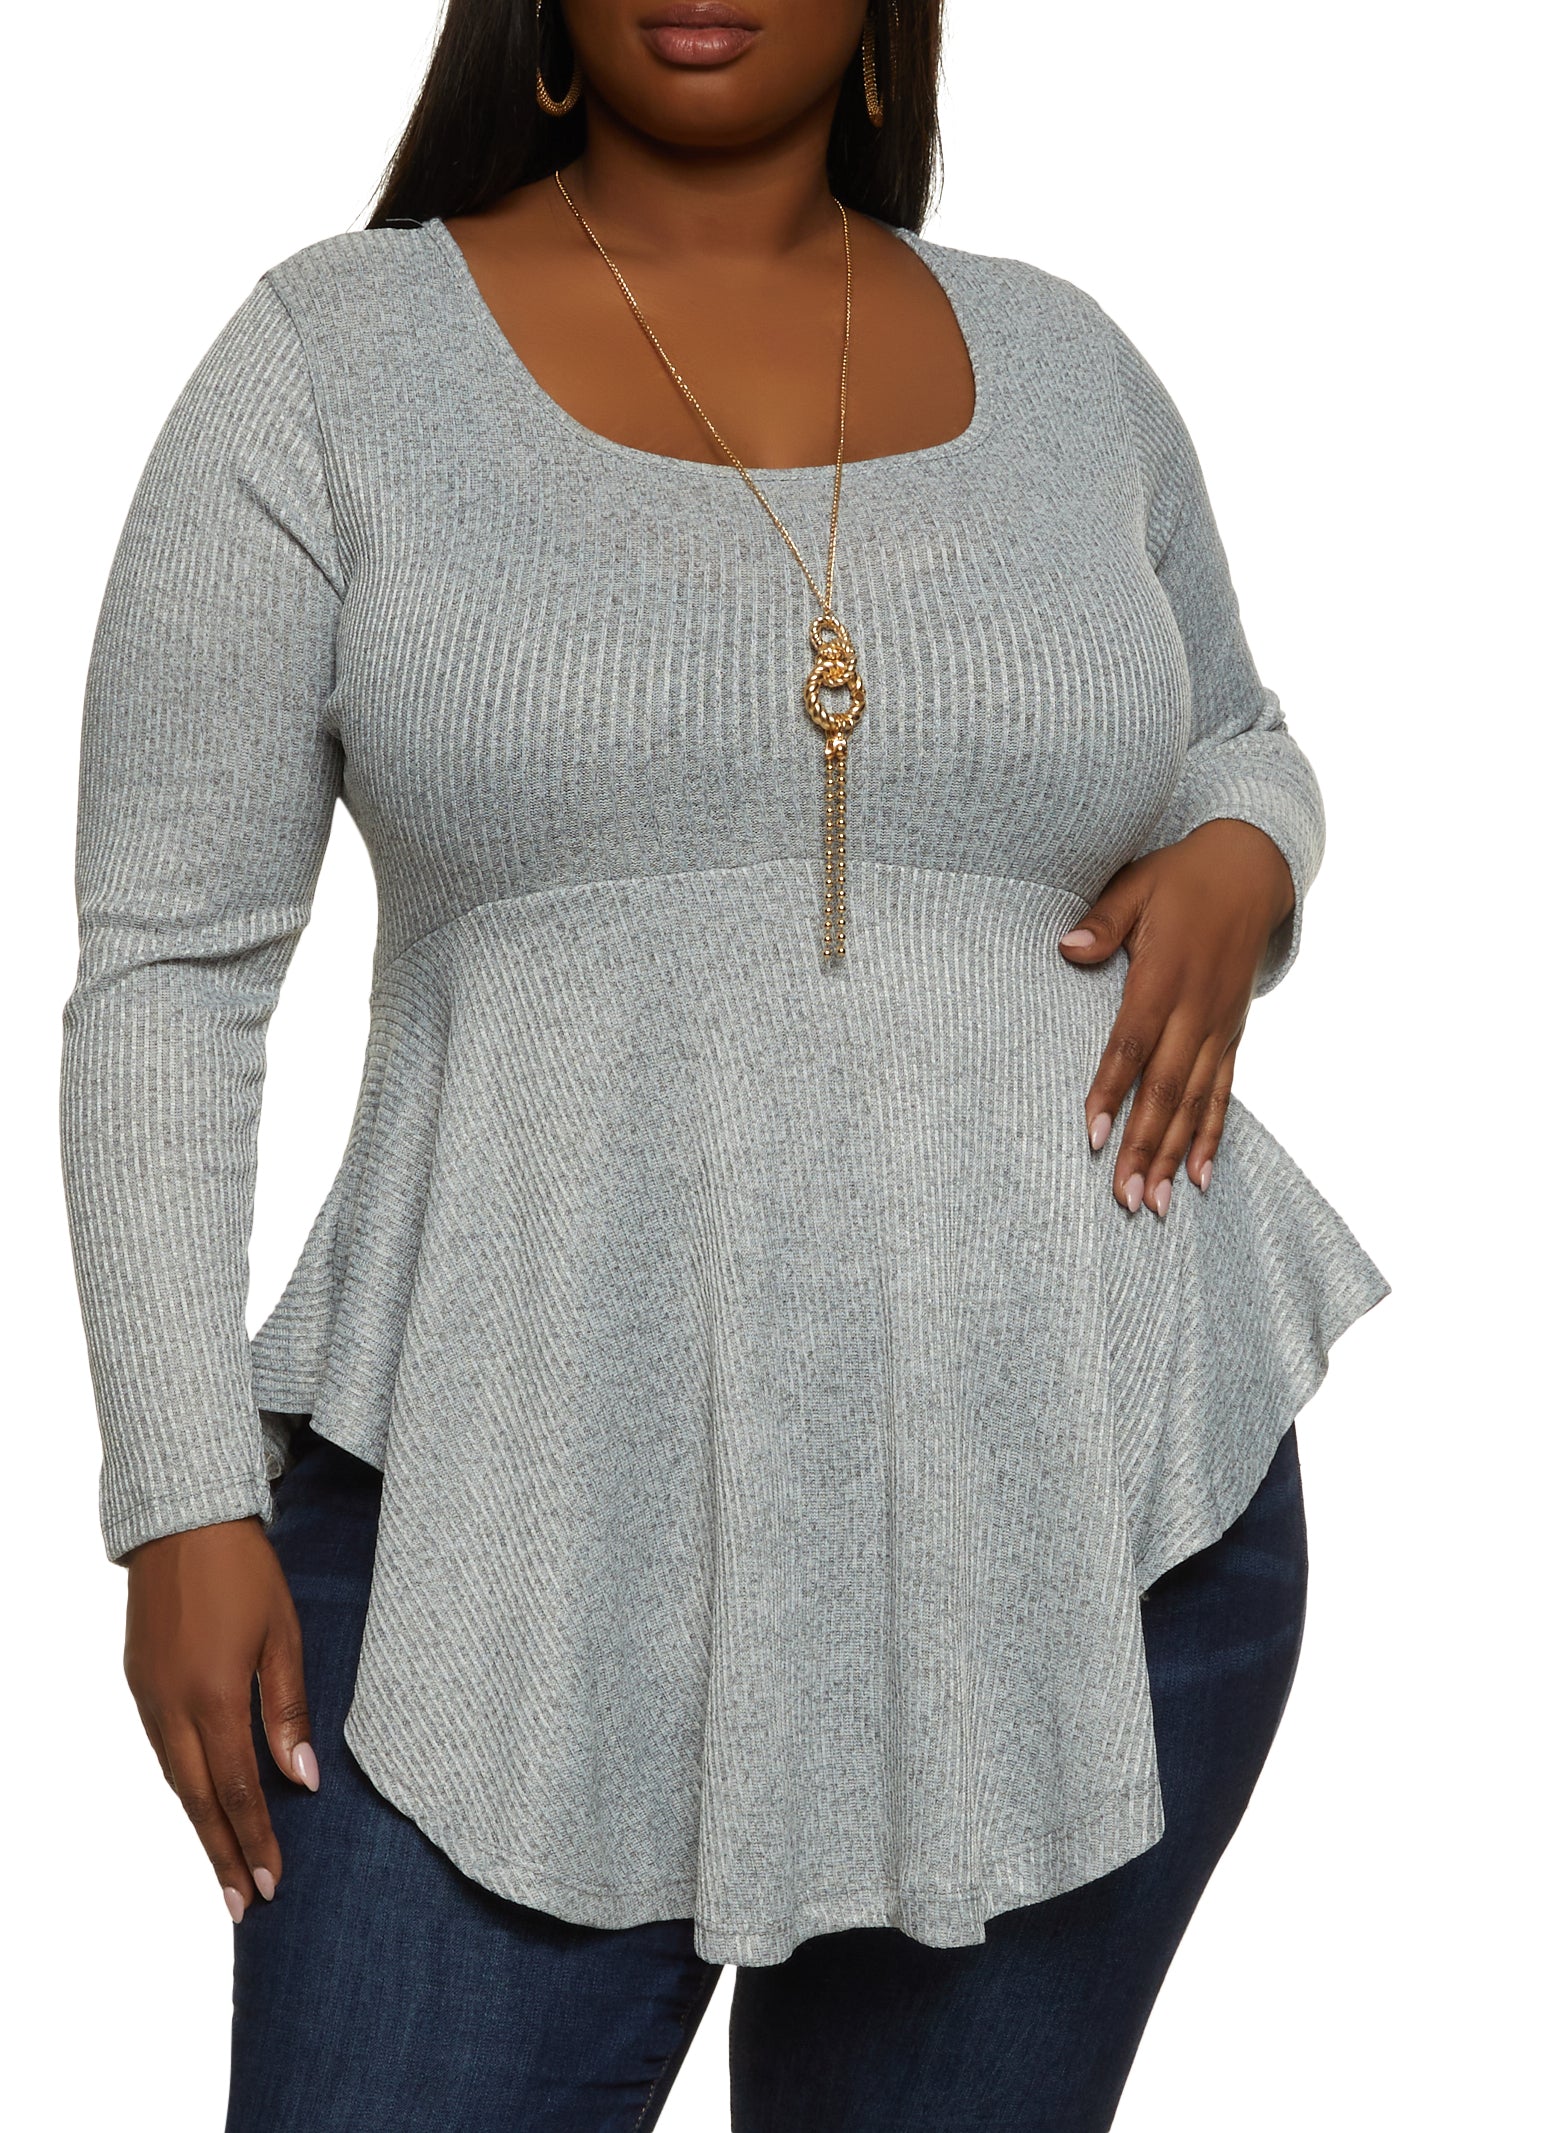 Plus Size Ribbed Knit Peplum Top with Necklace - Heather